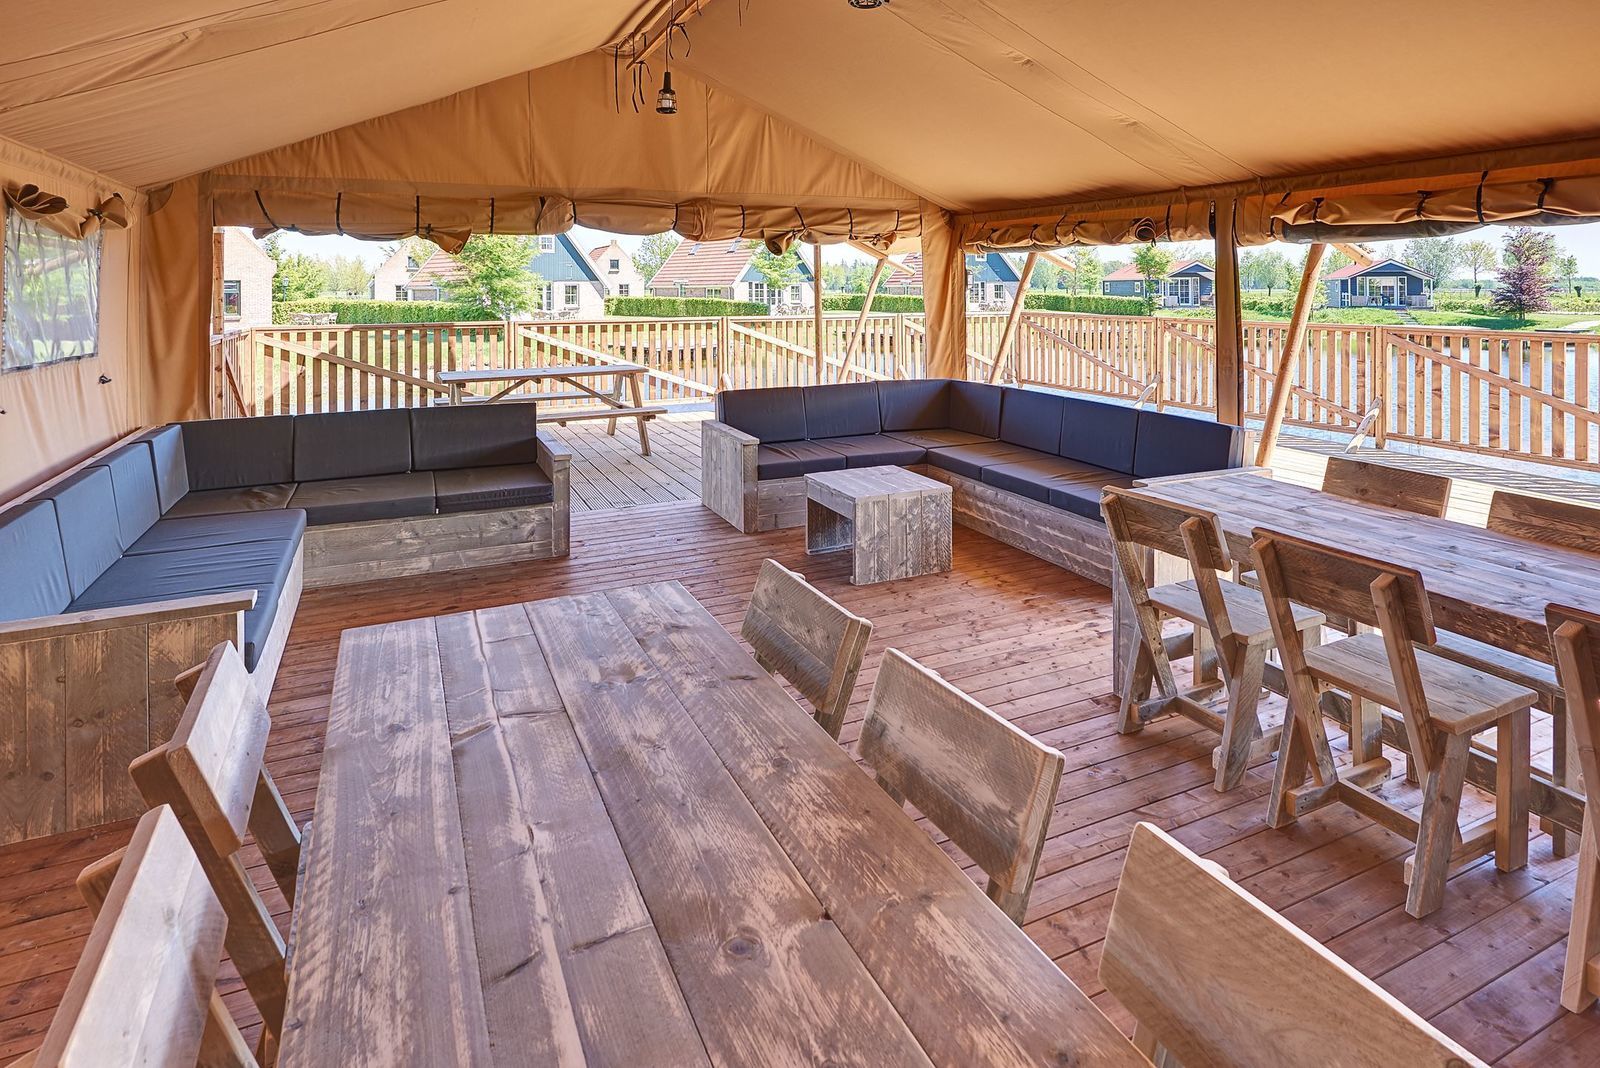 Group accommodation: group tent + four 6-person luxury glamping tents (24 people)